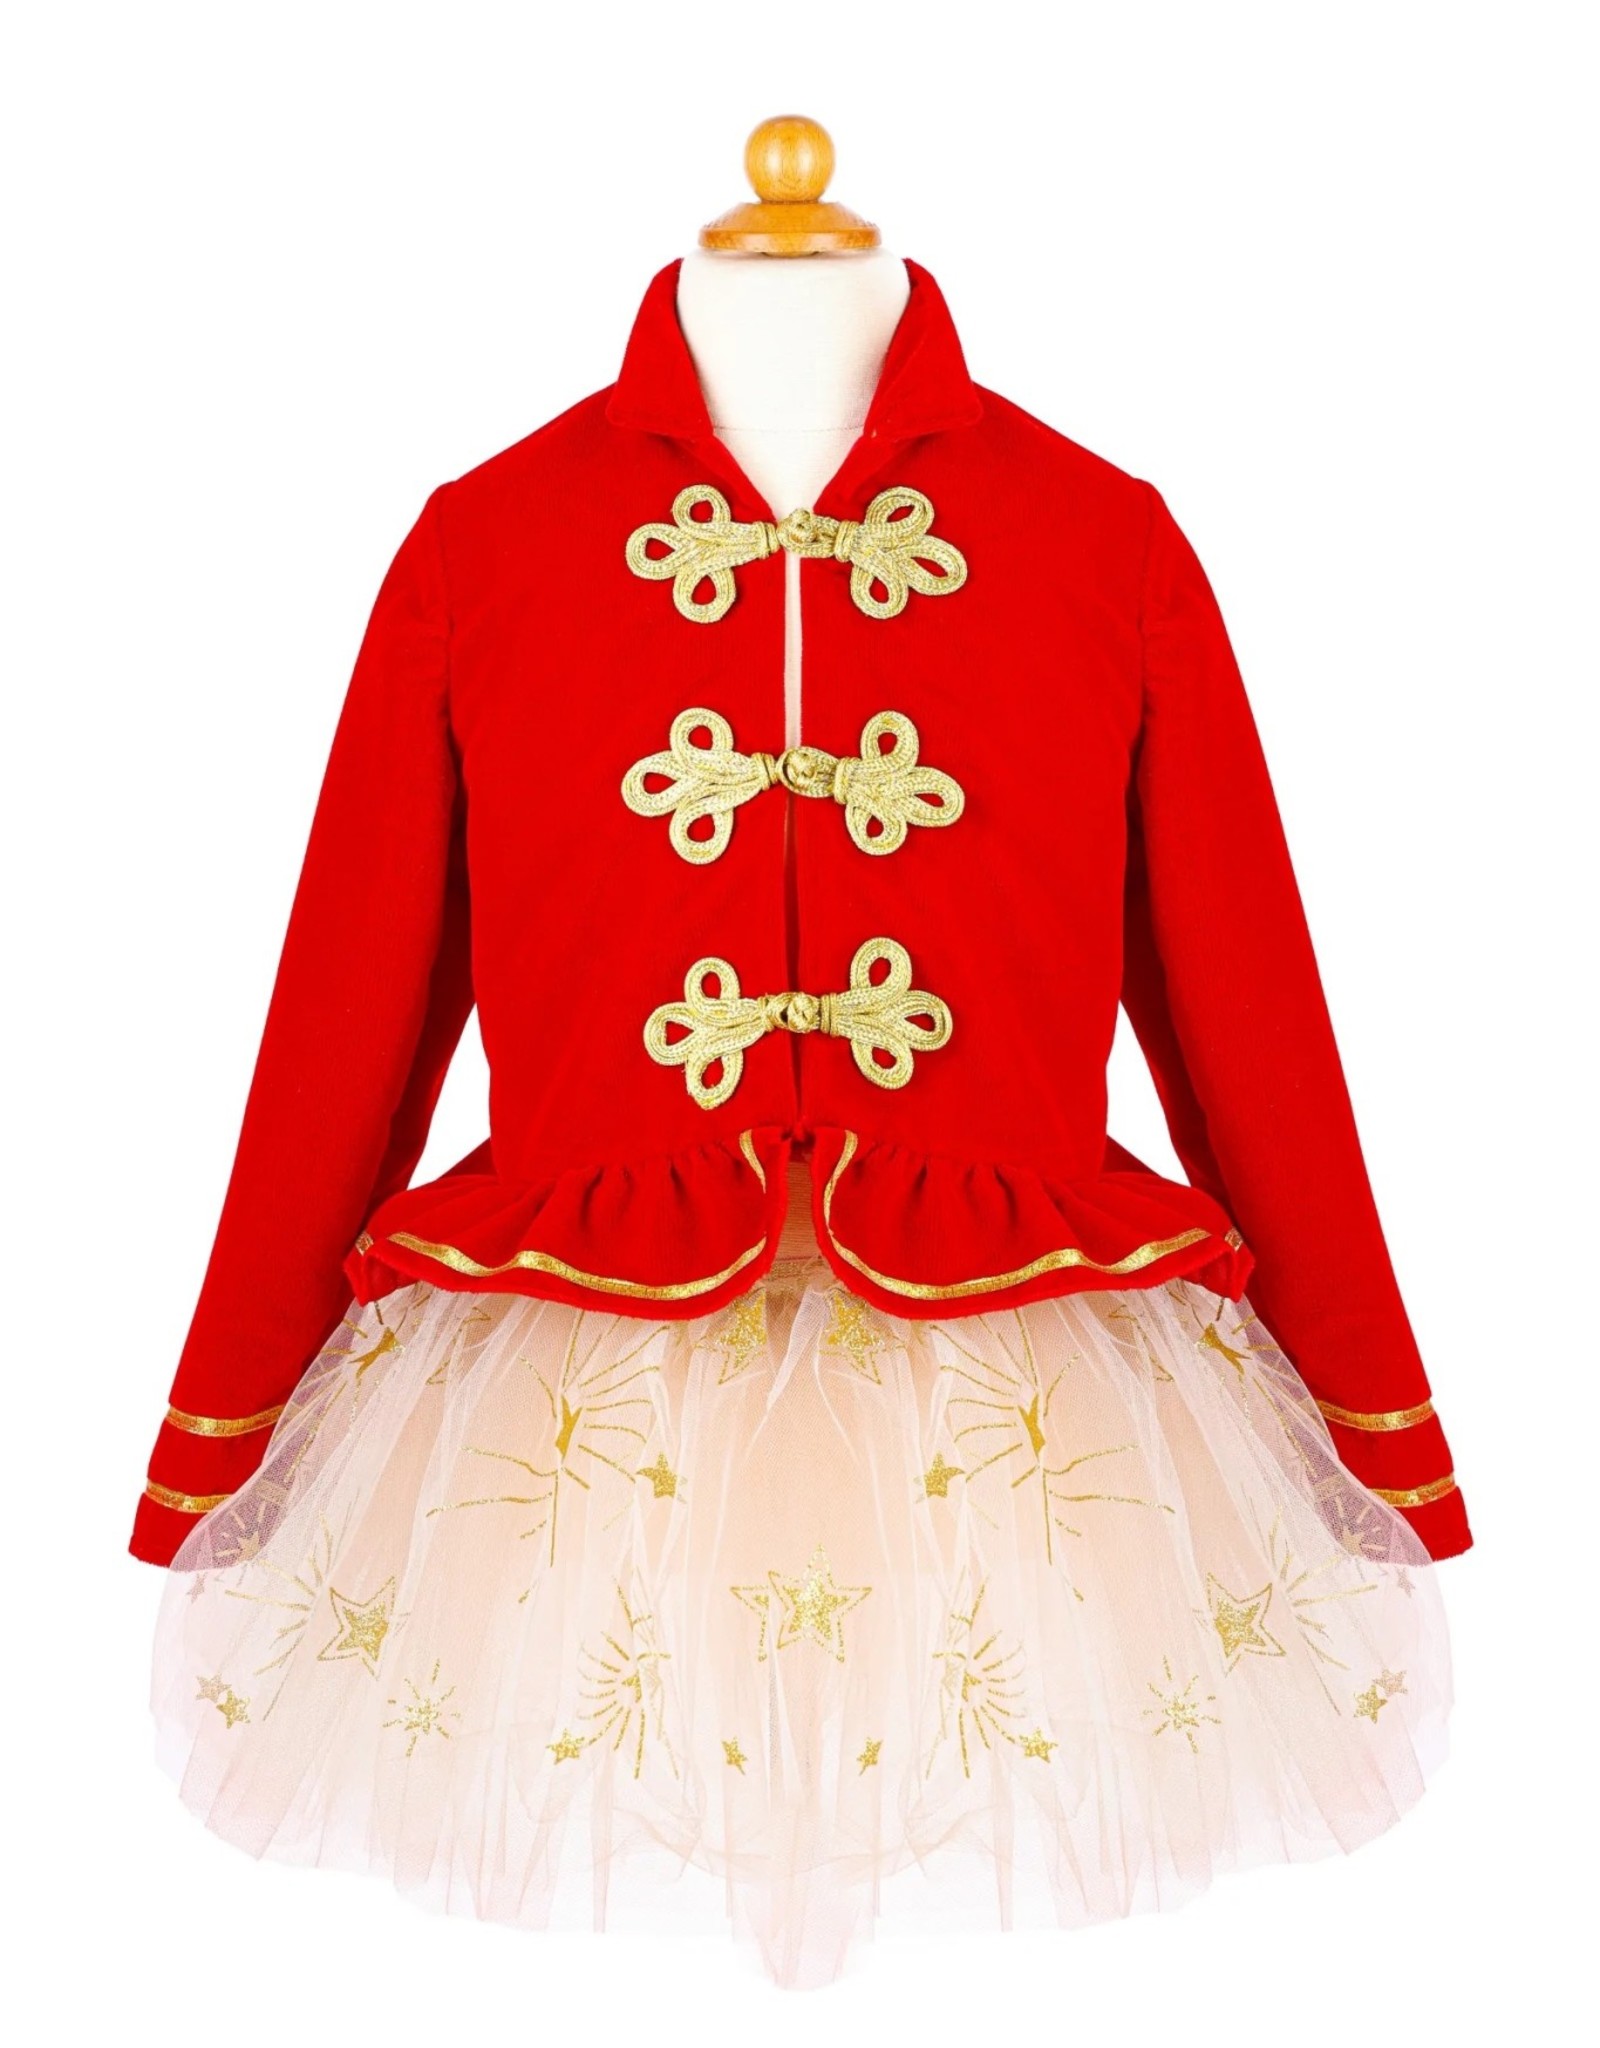 Great Pretenders Toy Soldier Jacket, Red, Size 5-6